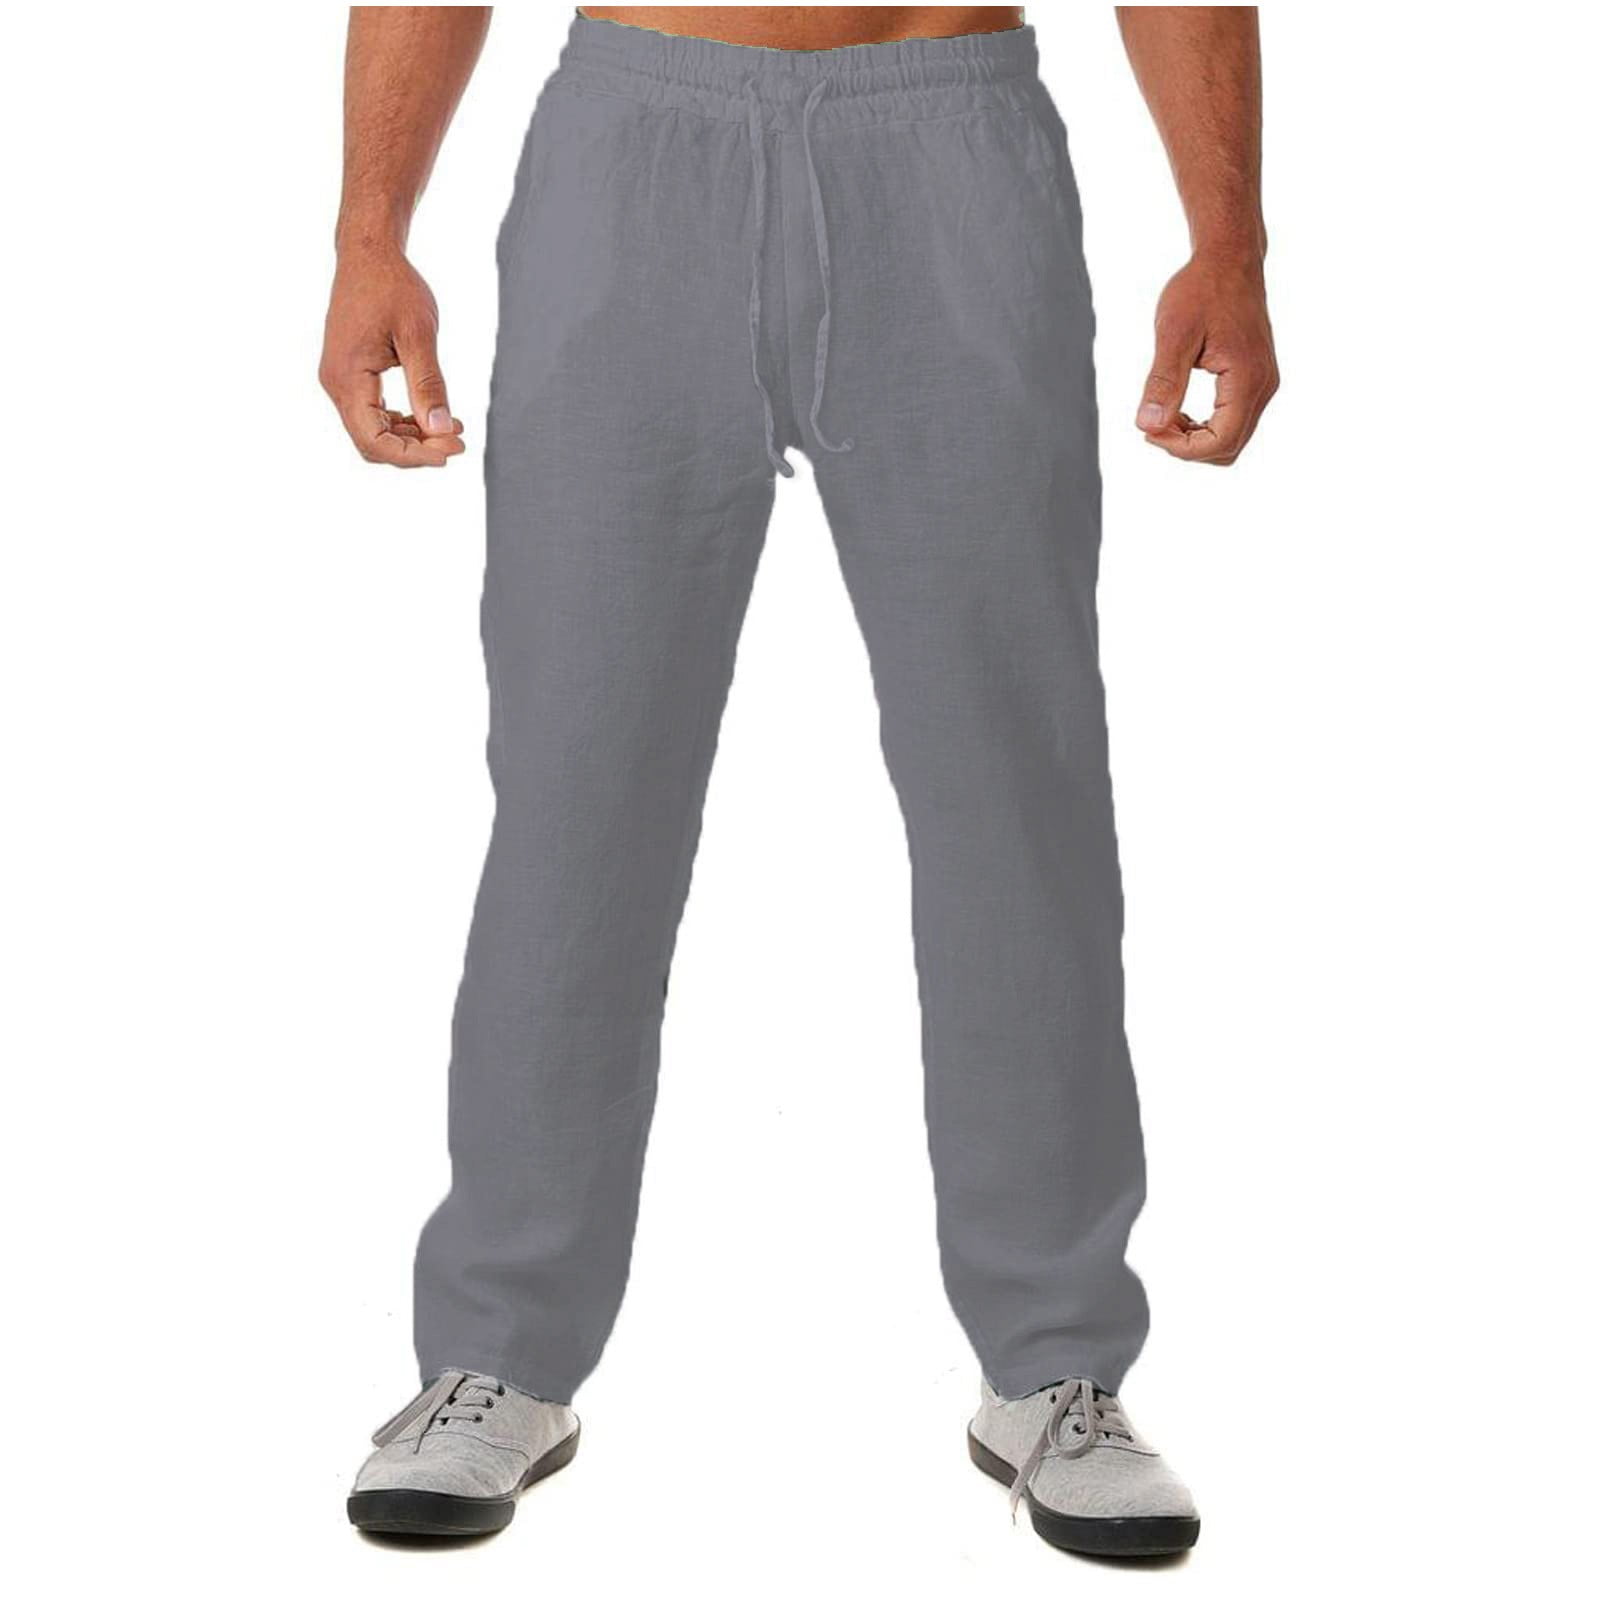 Stamzod 60% Cotton And 40% Linen Pants For Mens Casual Pants Drastring ...